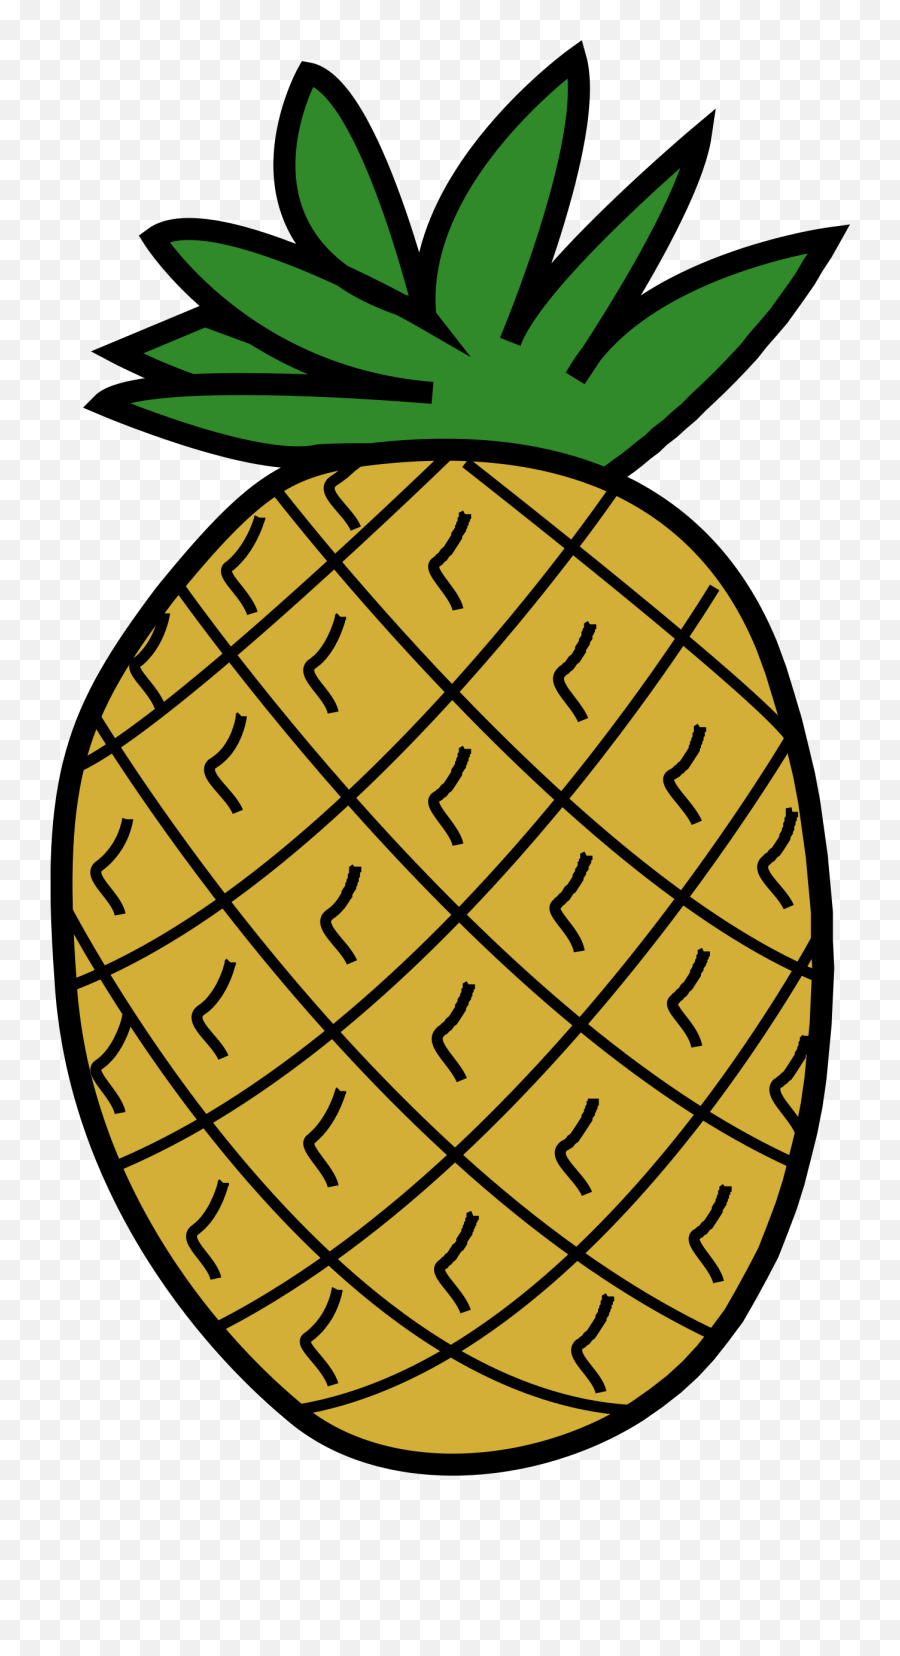 Cool Clipart Pineapple - Clipart Of A Pineapple Png,Pineapple Clipart Png